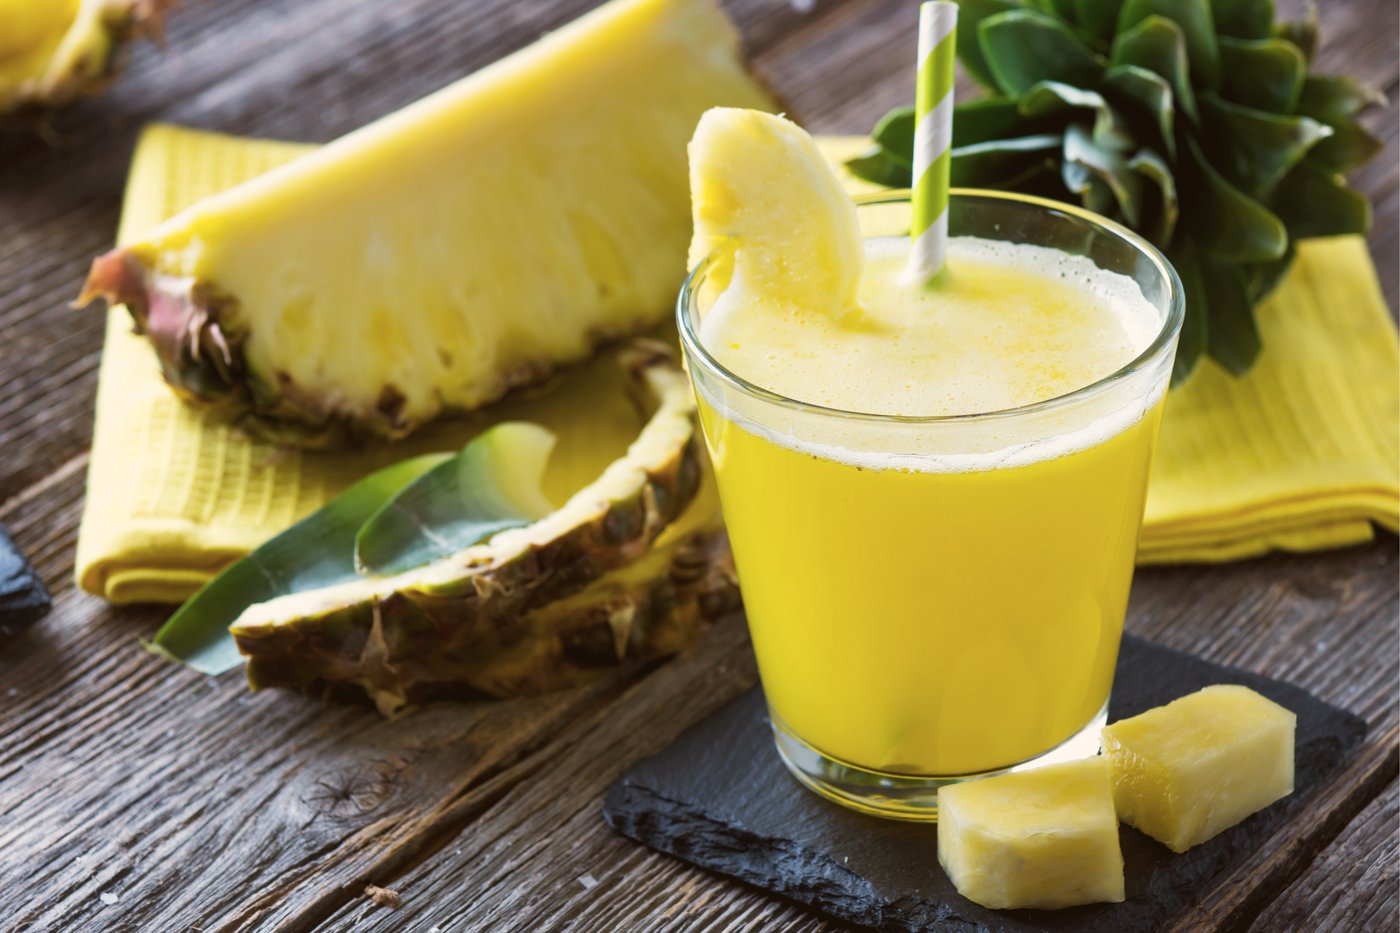 a glass of pineapple chia immunity wellness smoothie garnished with a slice of pineapple with a yellow-green patterned paper straw with two slices of pineapple on top of a black-painted square wood surrounded by pineapple peel and a wedge of pineapple 